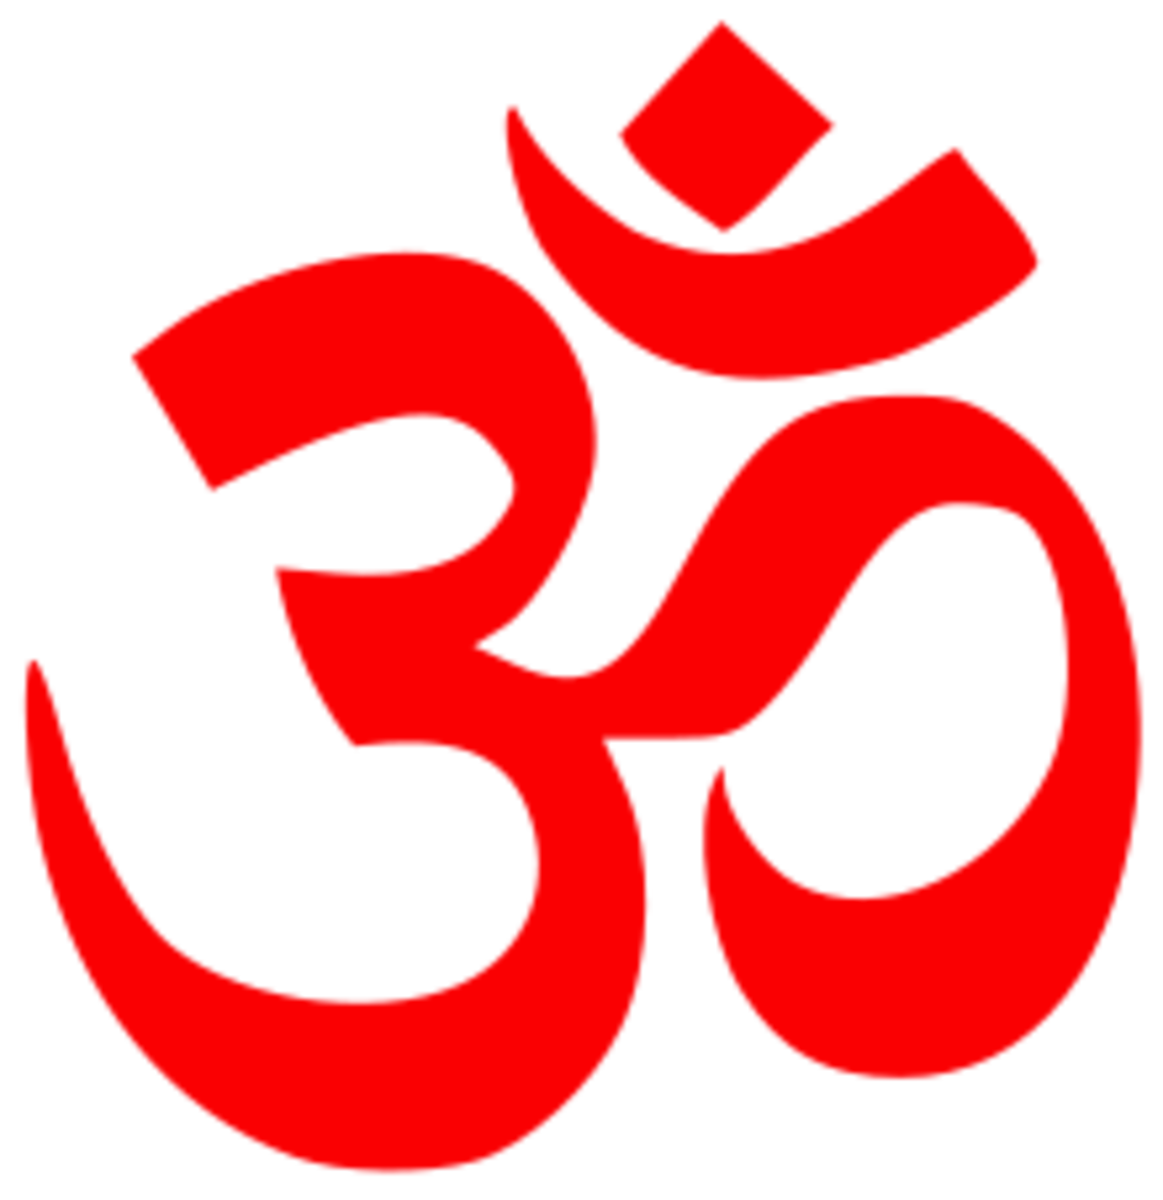 The symbol for the sound "Om."